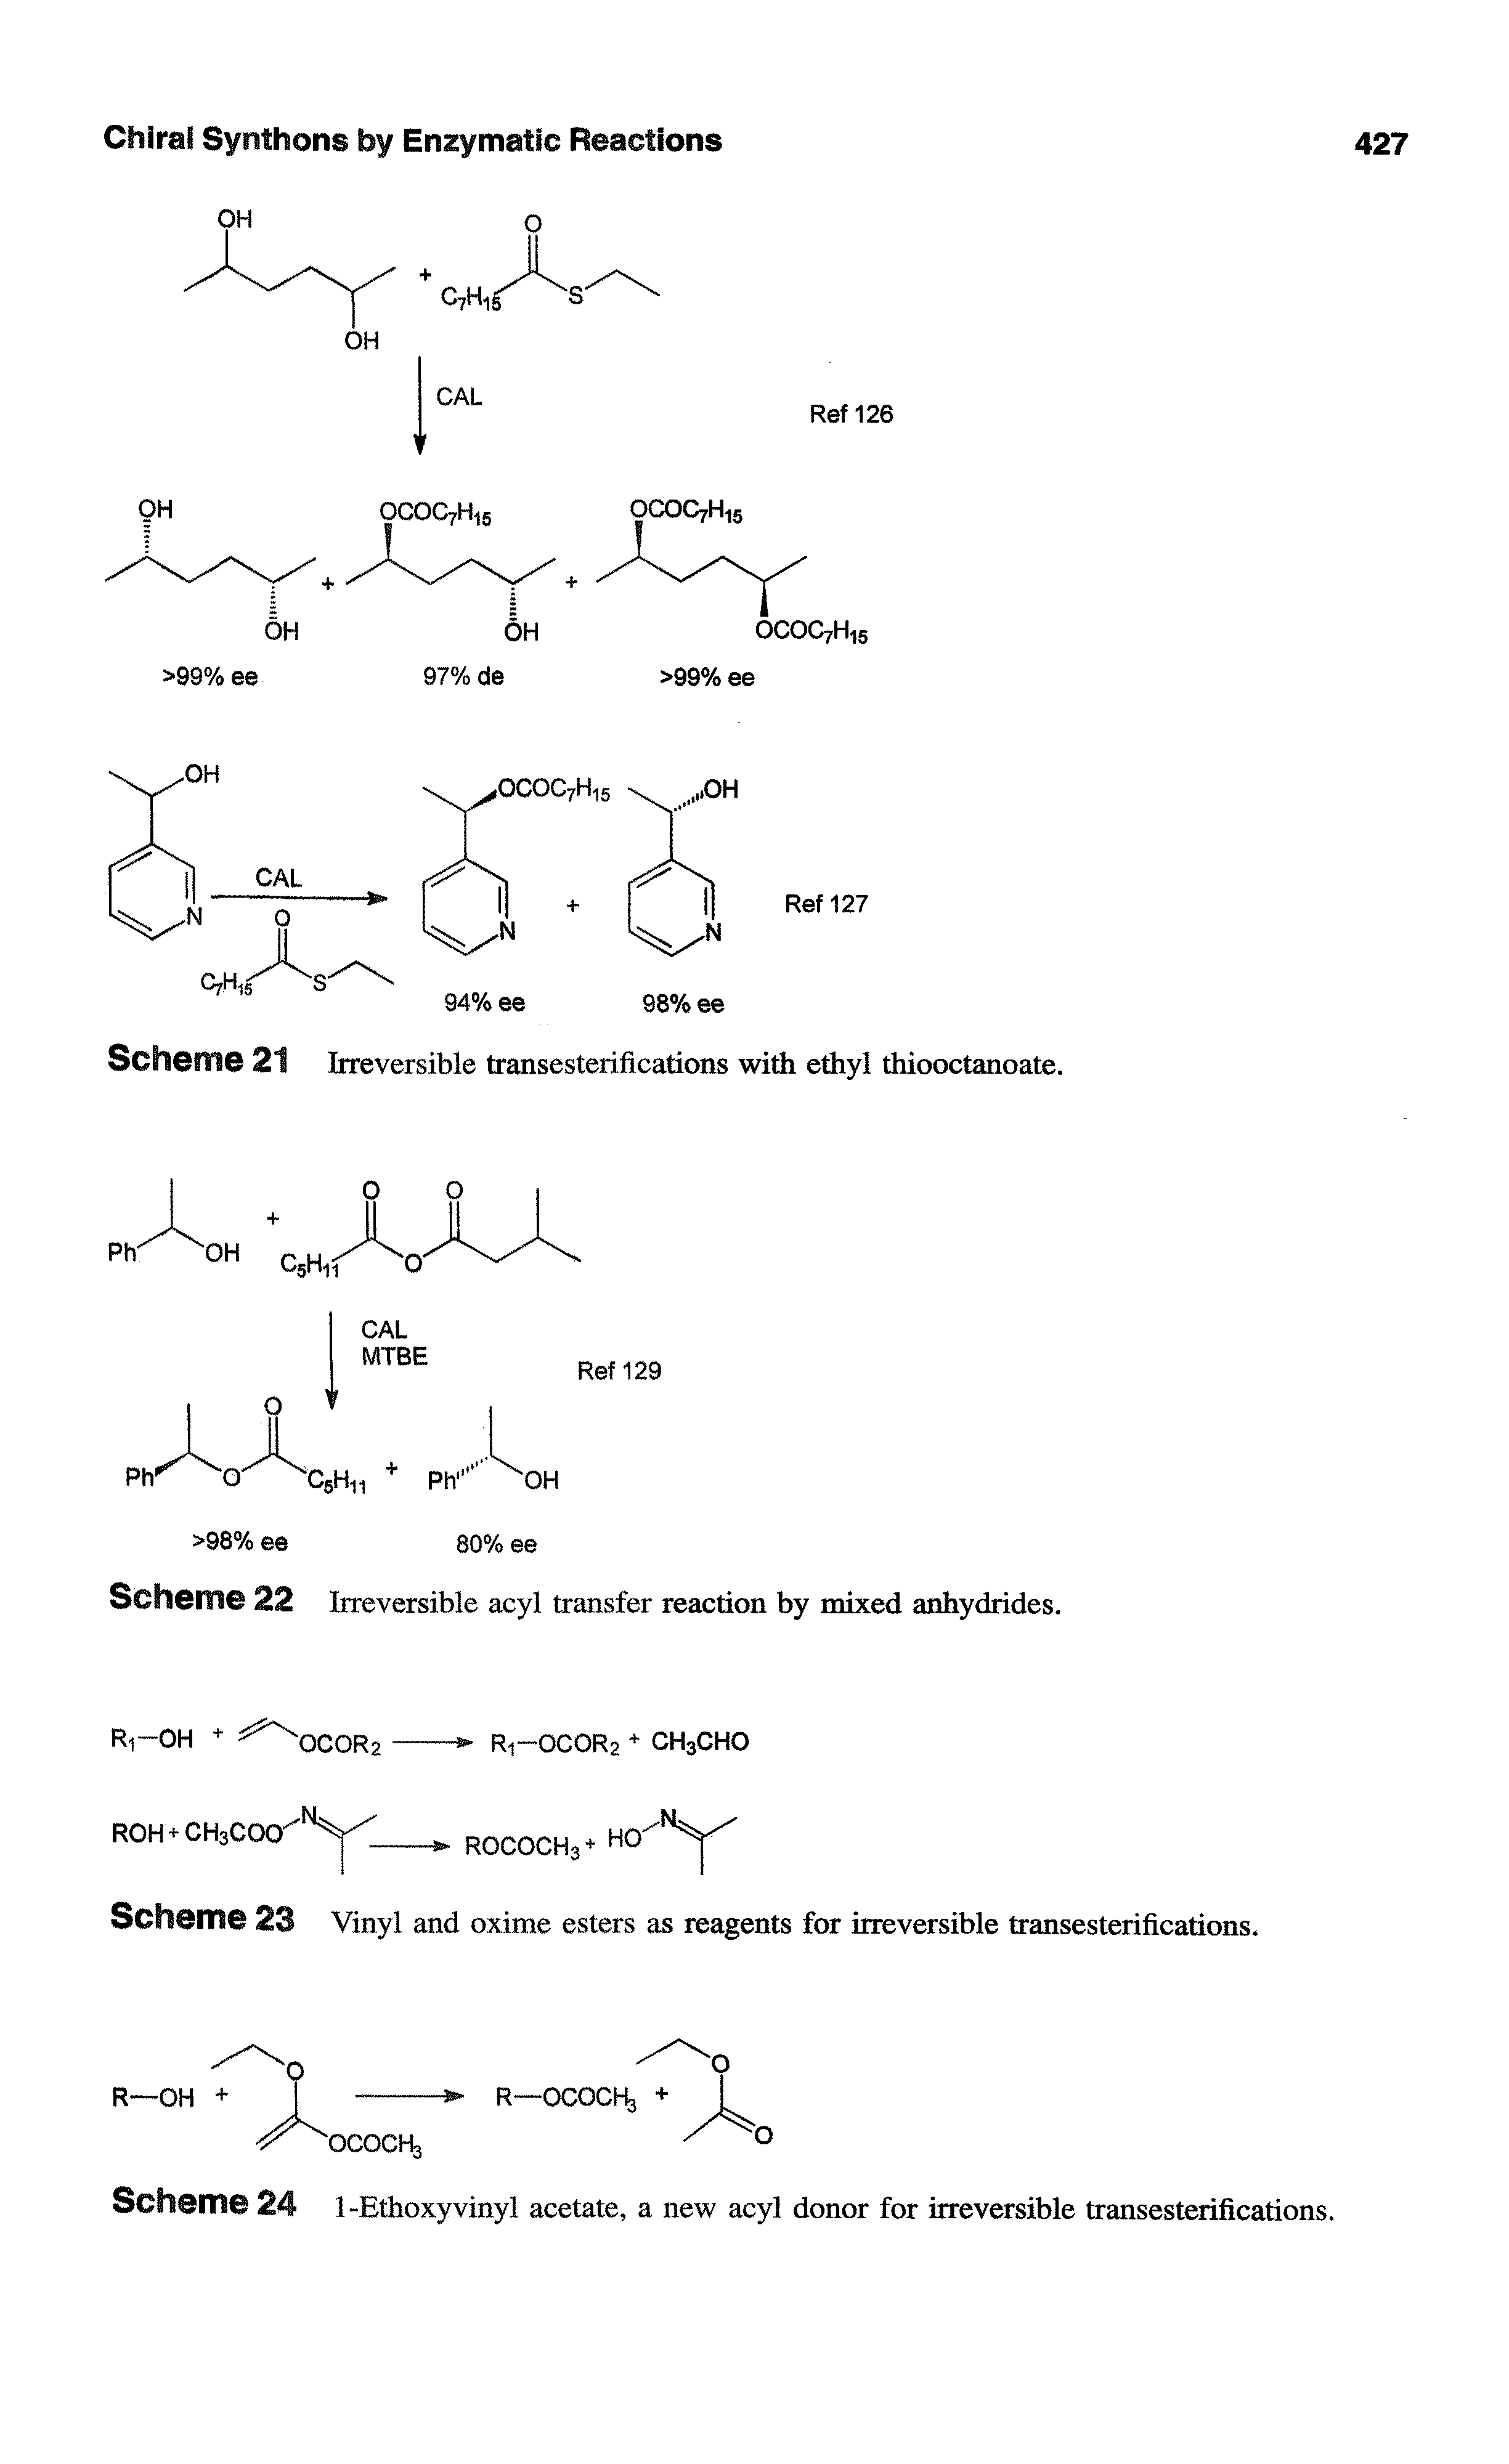 Scheme 22 Irreversible acyl transfer reaction by mixed anhydrides.